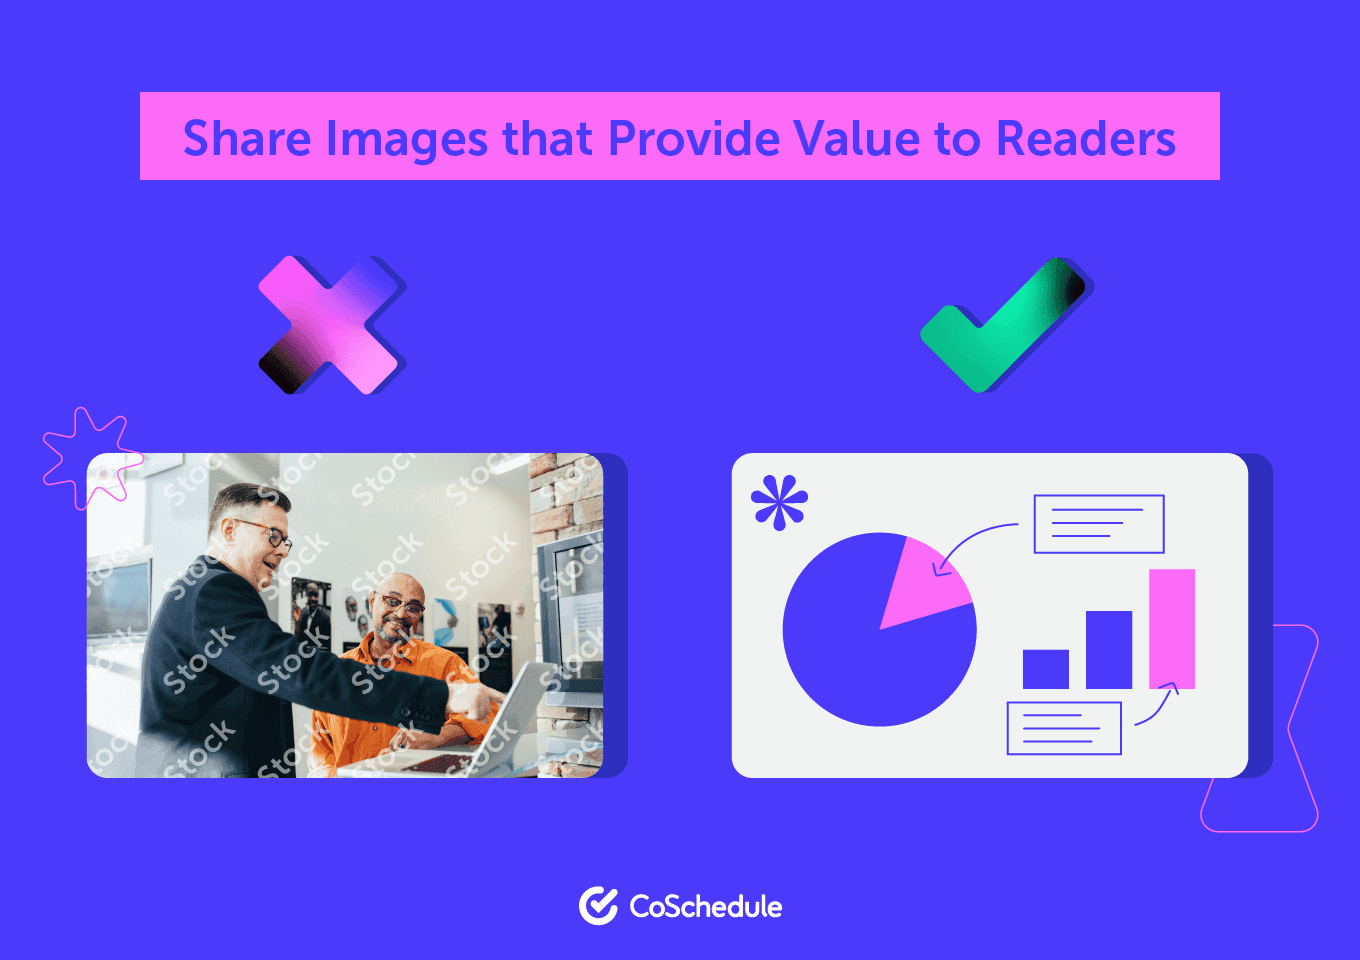 Share images that provide value to your readers